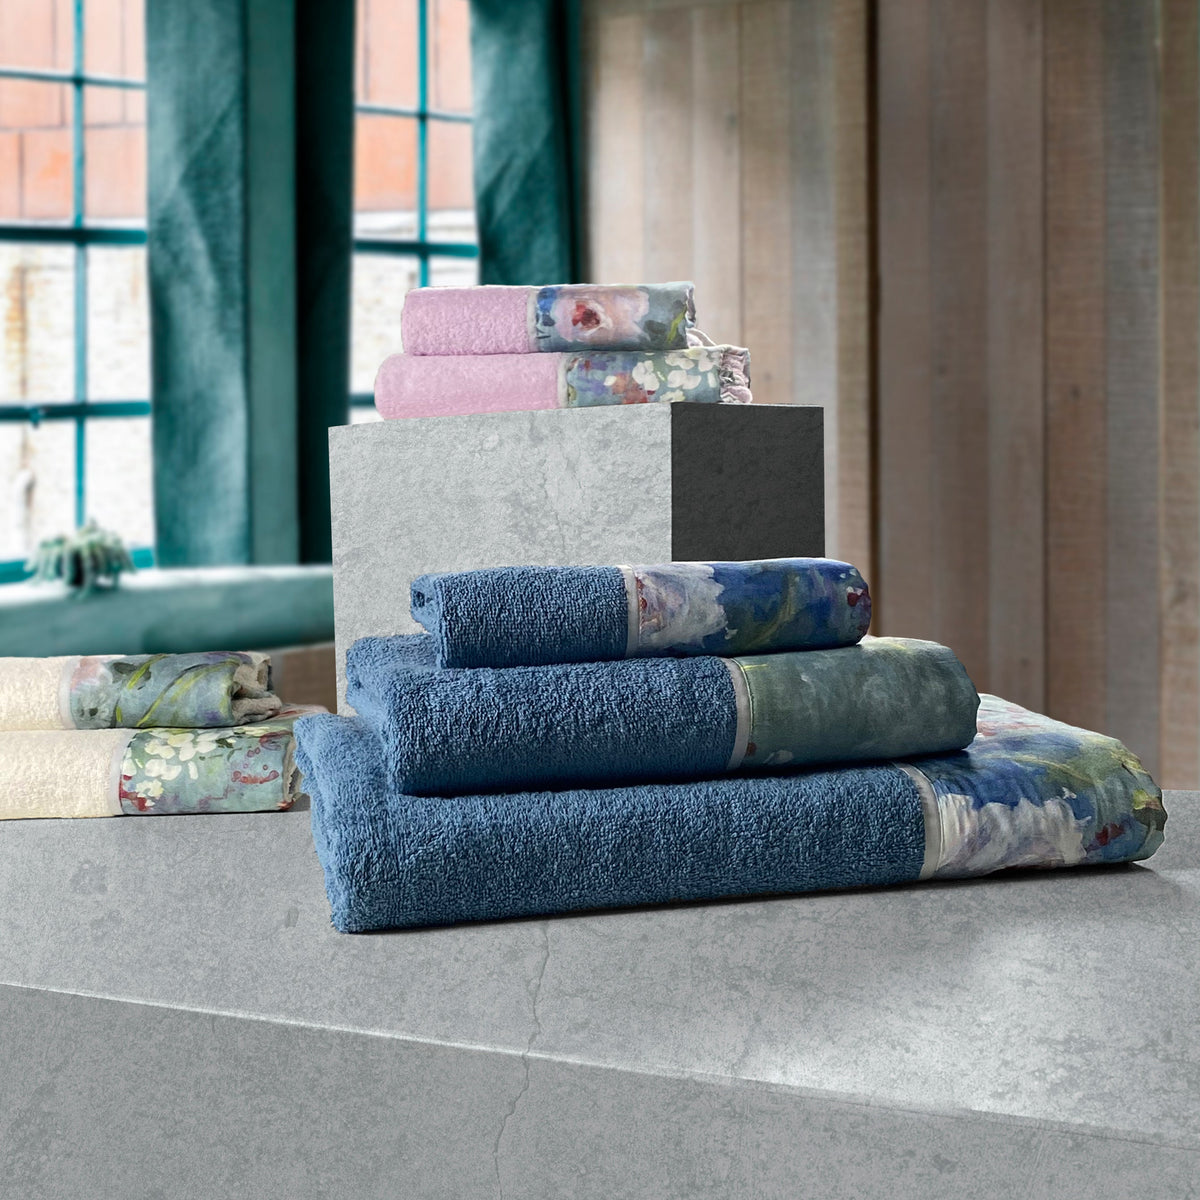 Towels in Terry Cotton with Satin Flounce - Acquerello